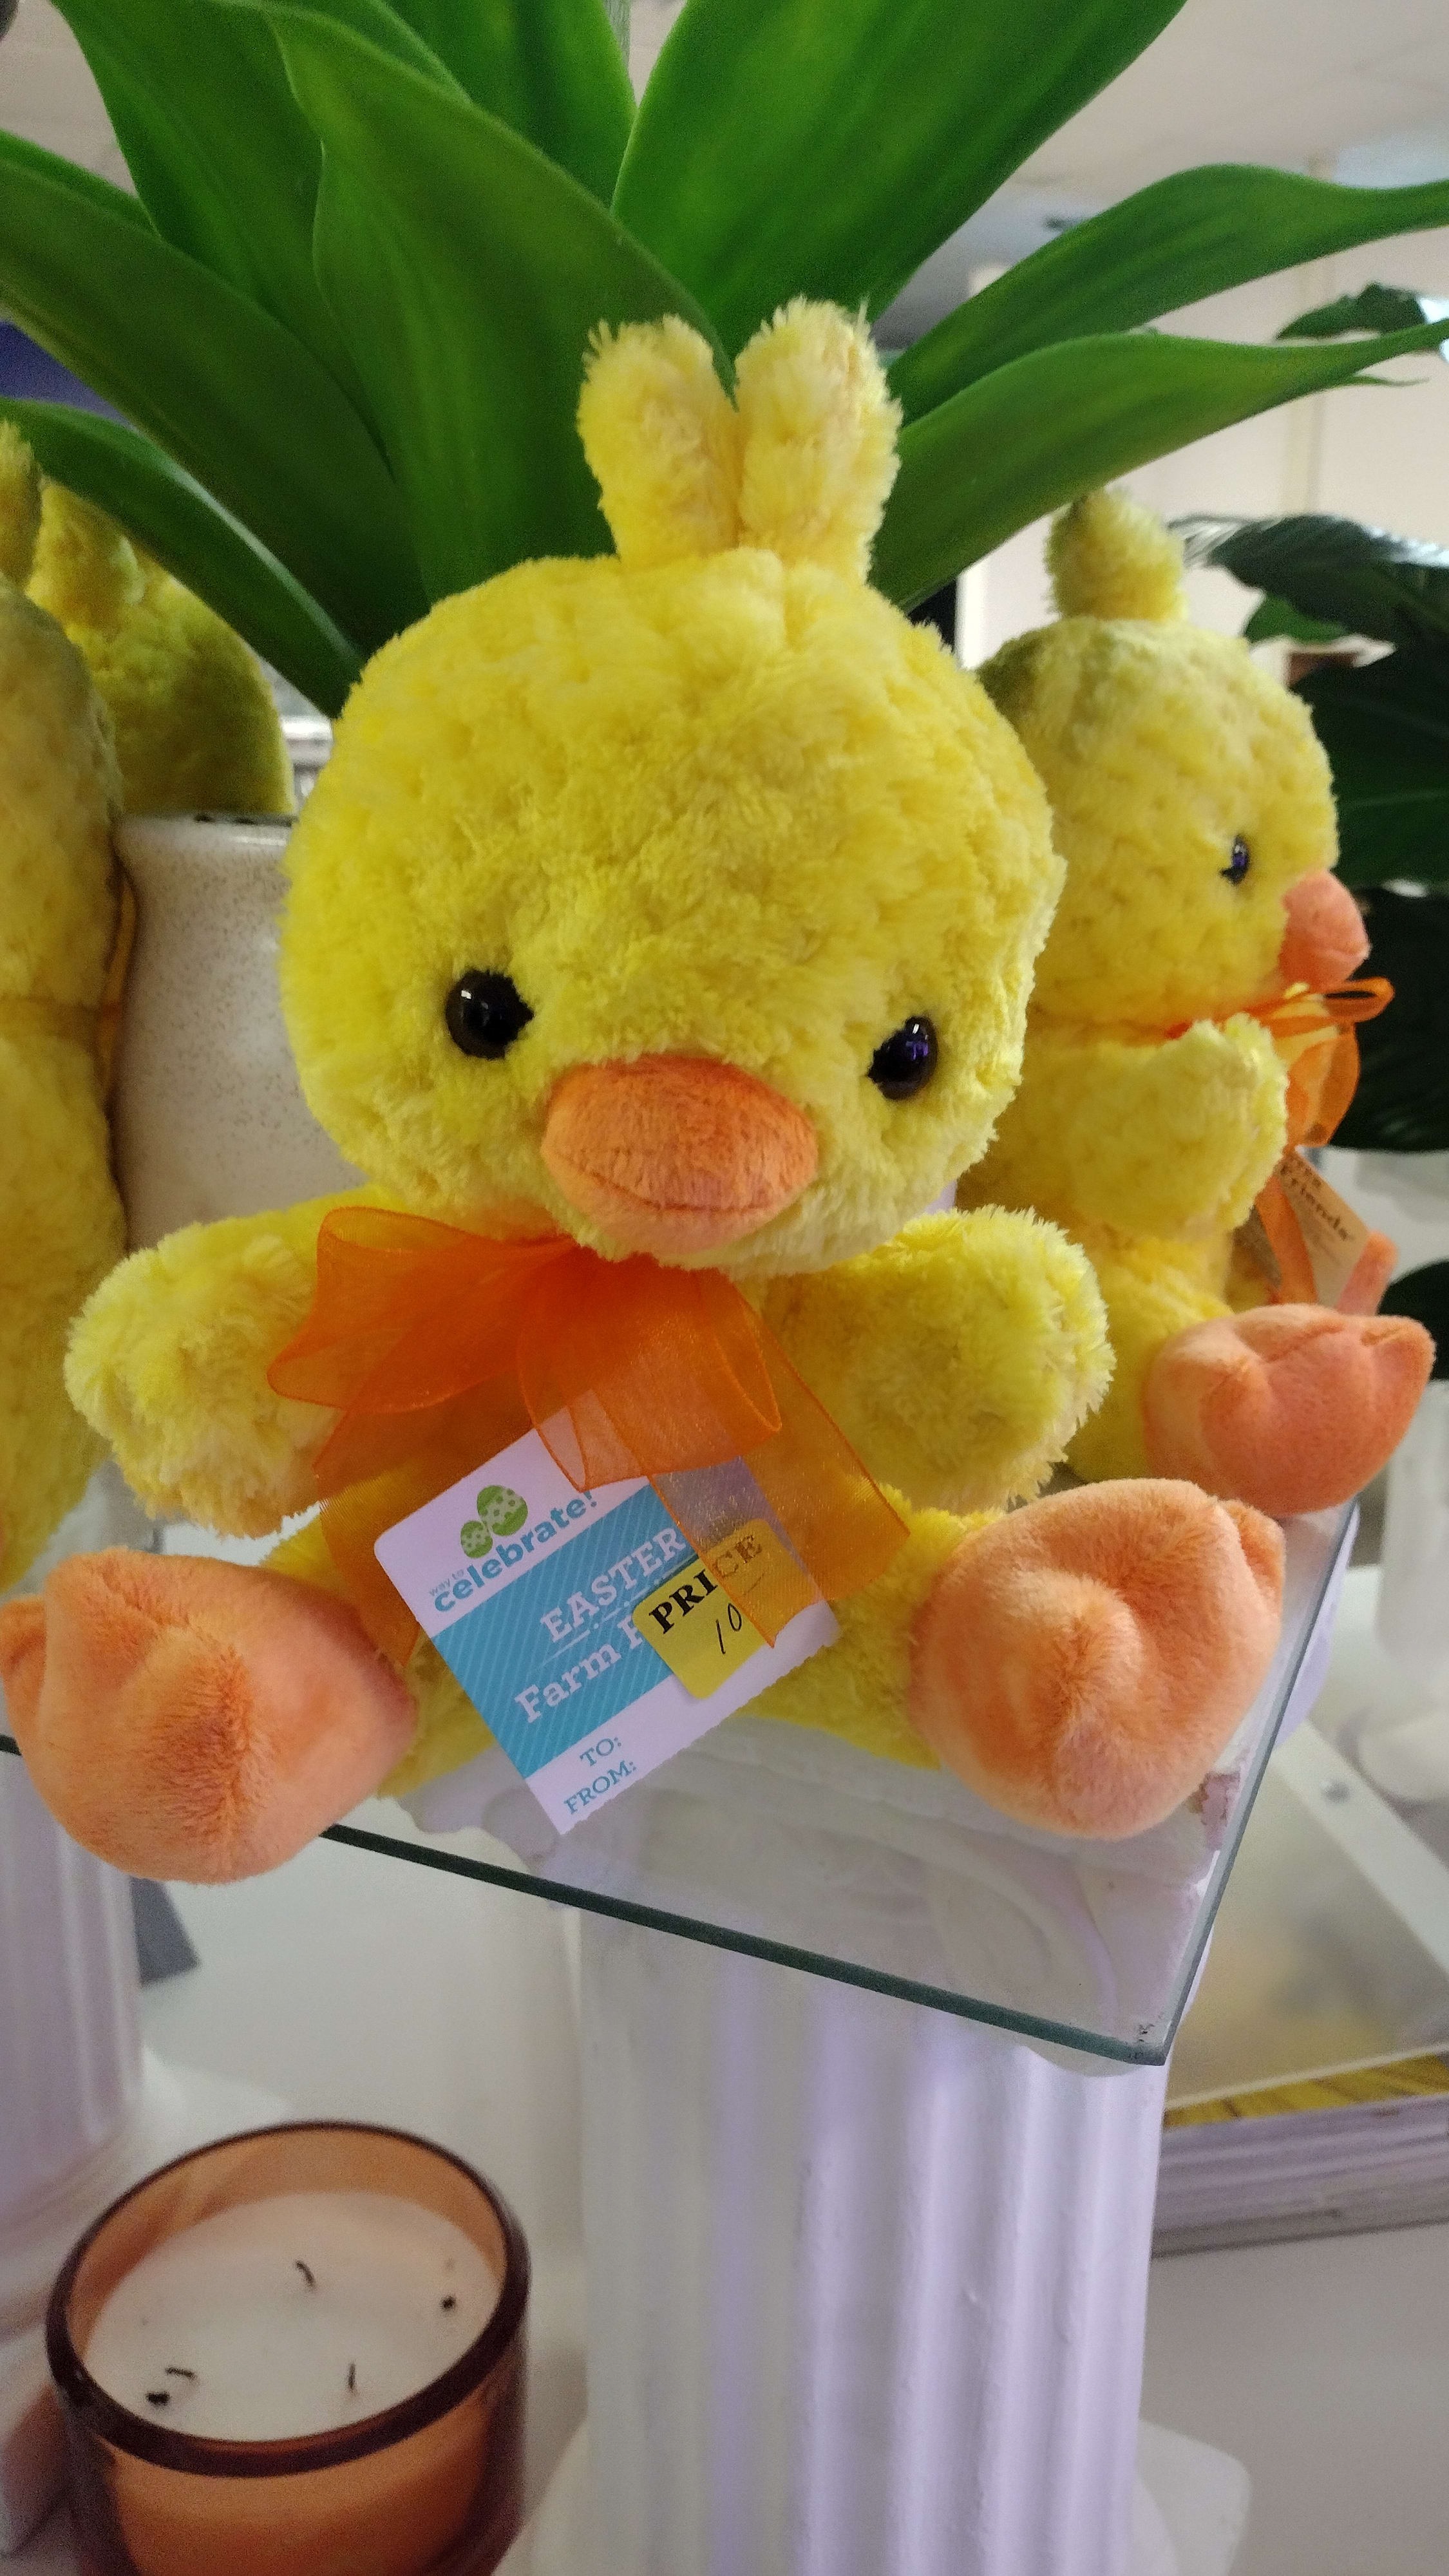 Easter Duckie - Pair it with any balloon bouquet or floral arrangment